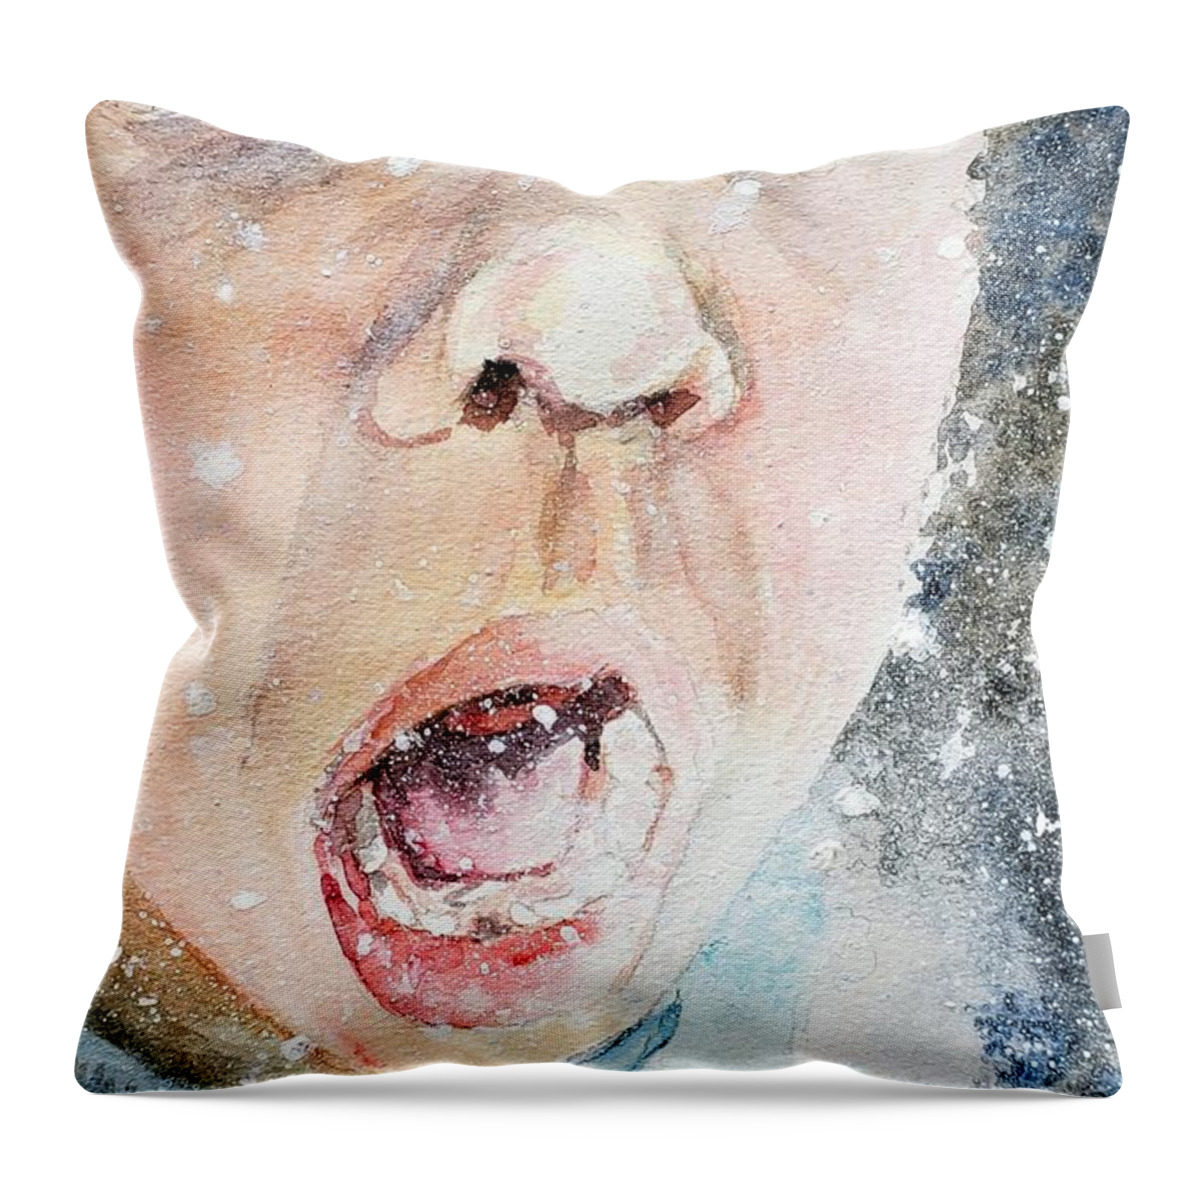 Snow Throw Pillow featuring the painting It's SNOWING by Merana Cadorette